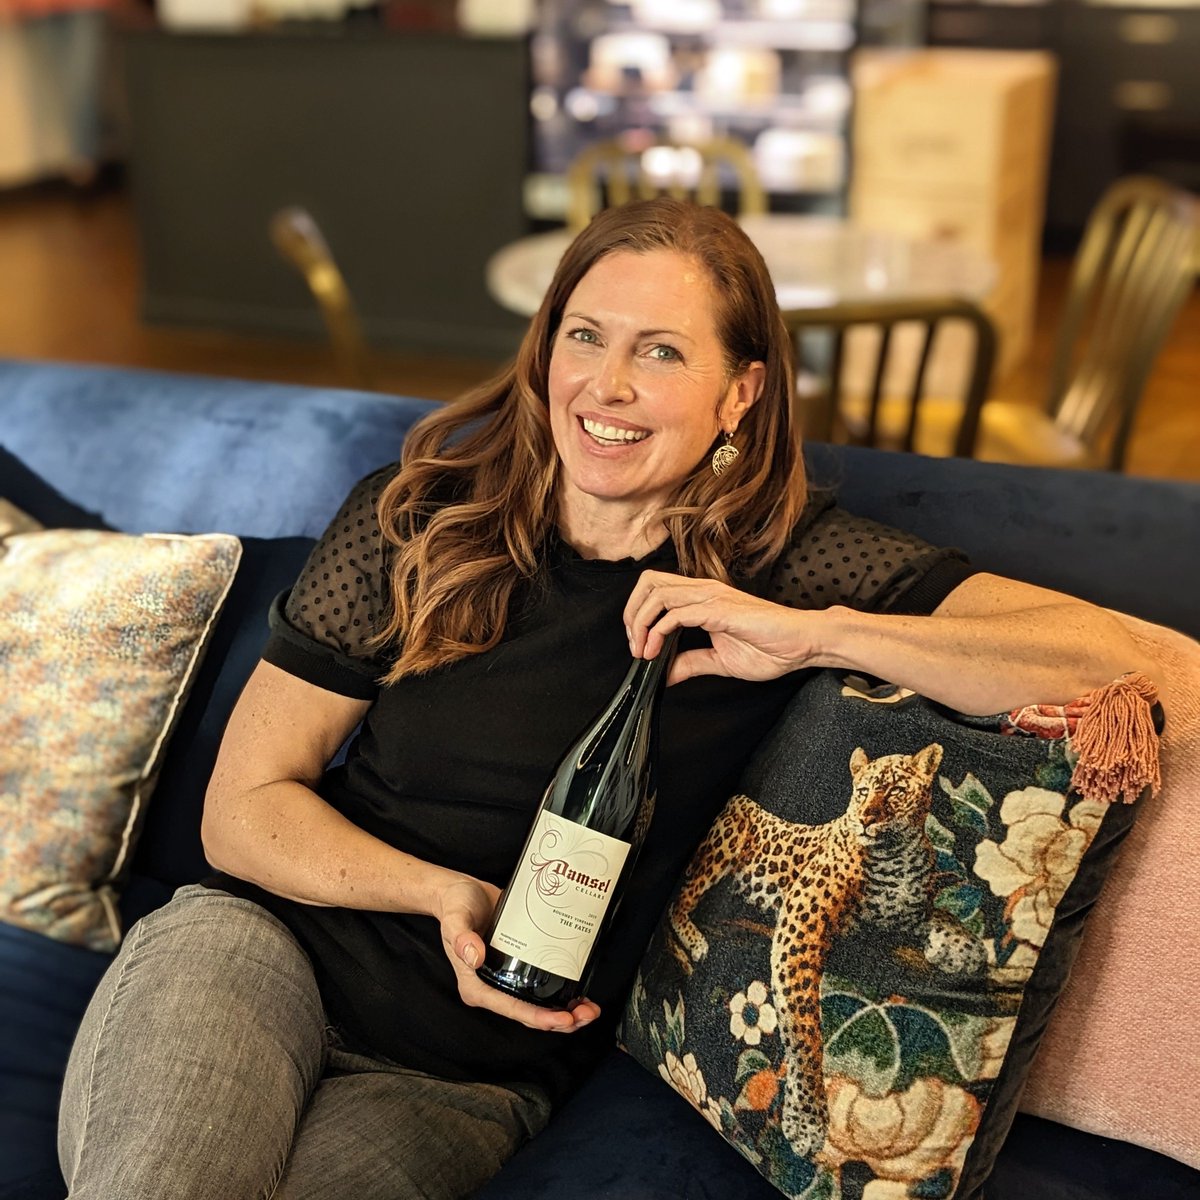 Meet our winemaker, Mari Womack, IRL & learn about the wine in your glass! Mari is at our Hollywood tasting room this weekend:⁠ 📅 Saturday, 4/27, 2-6pm 🍷 pouring the current lineup including our newly released Malbec.⁠ 📷️: @grnlakegirl #wawine ⁠